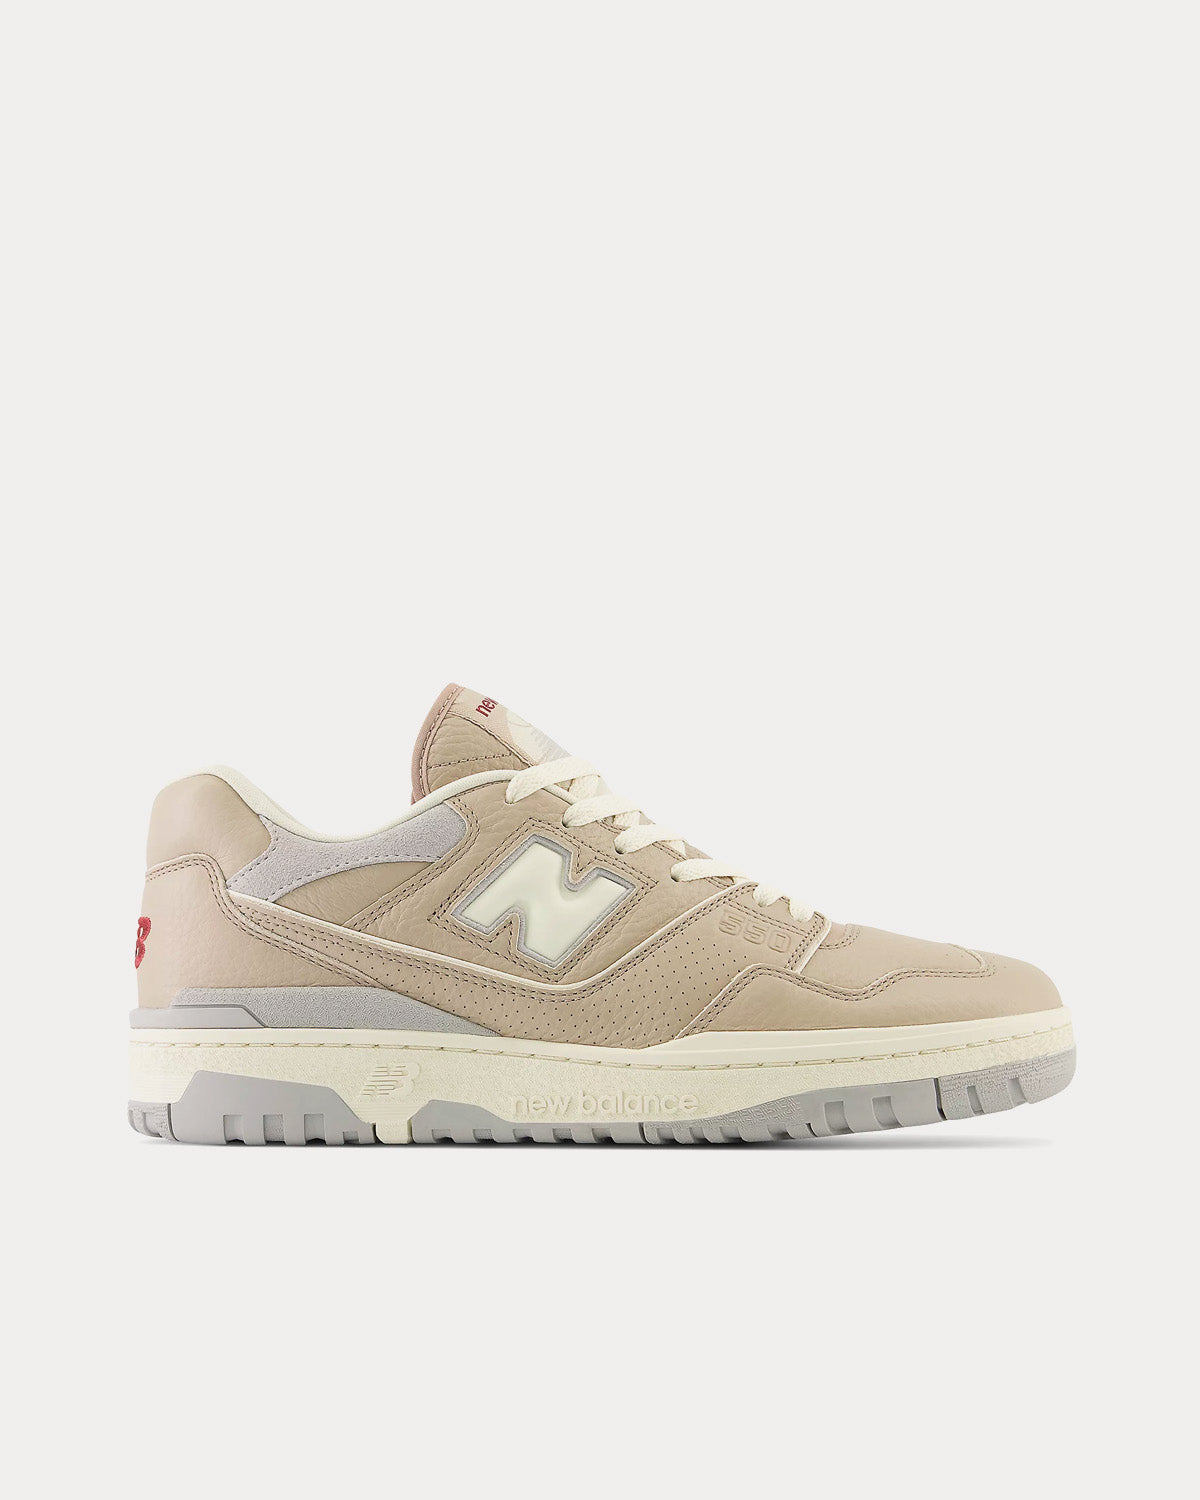 New Balance - BB550 Driftwood with Turtledove & Concrete Low Top Sneakers